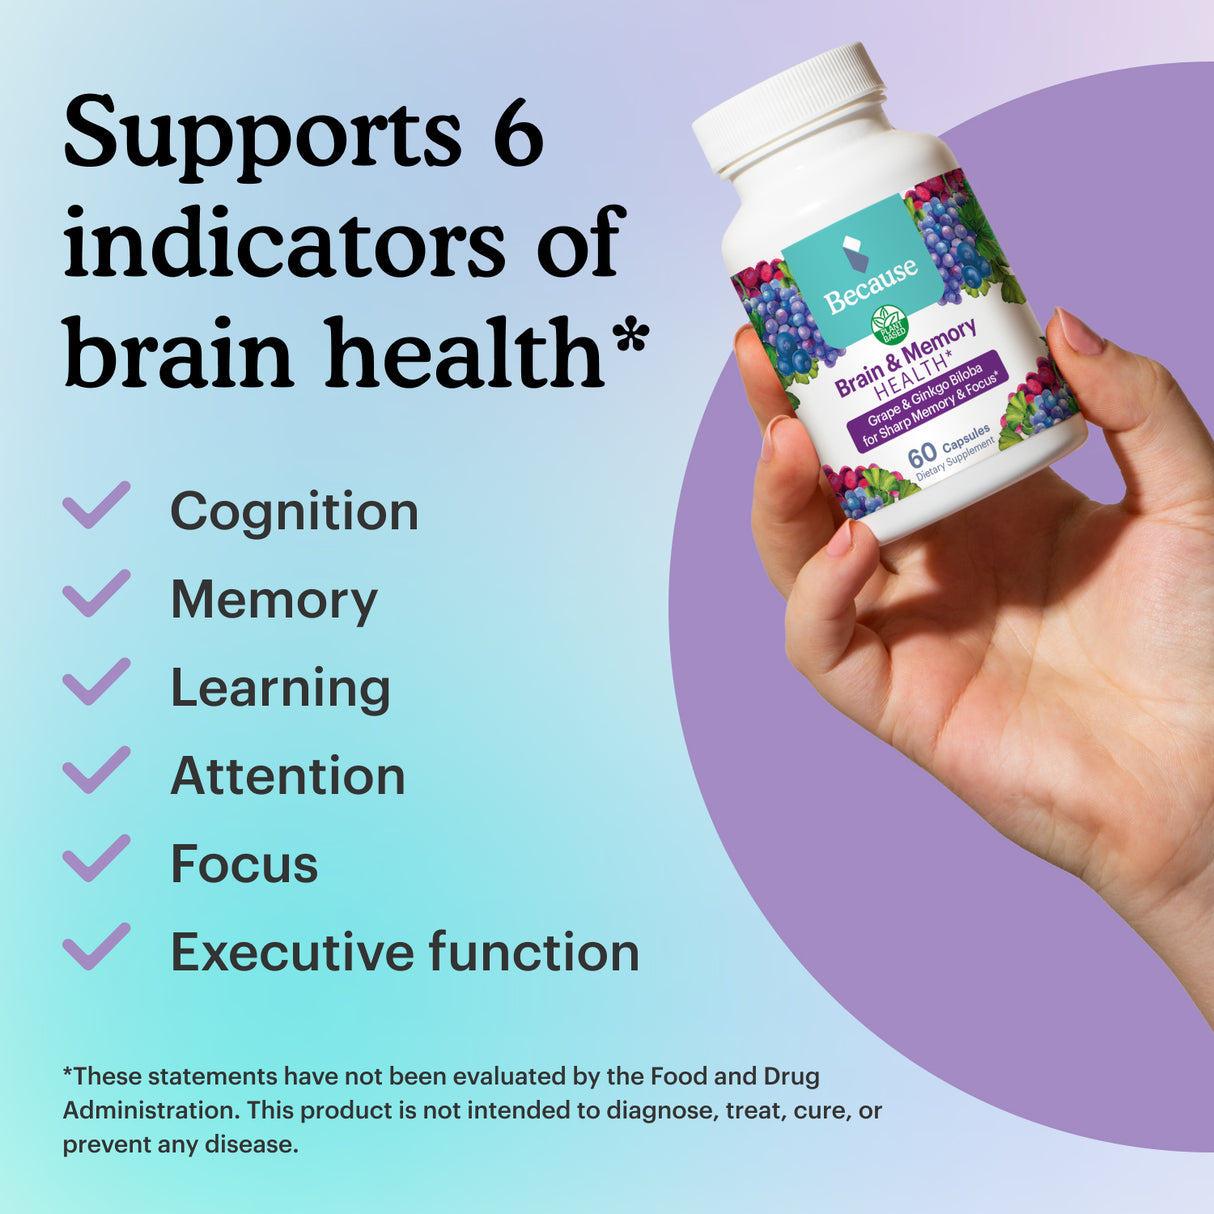 List of 6 indicators of brain health that the supplement supports